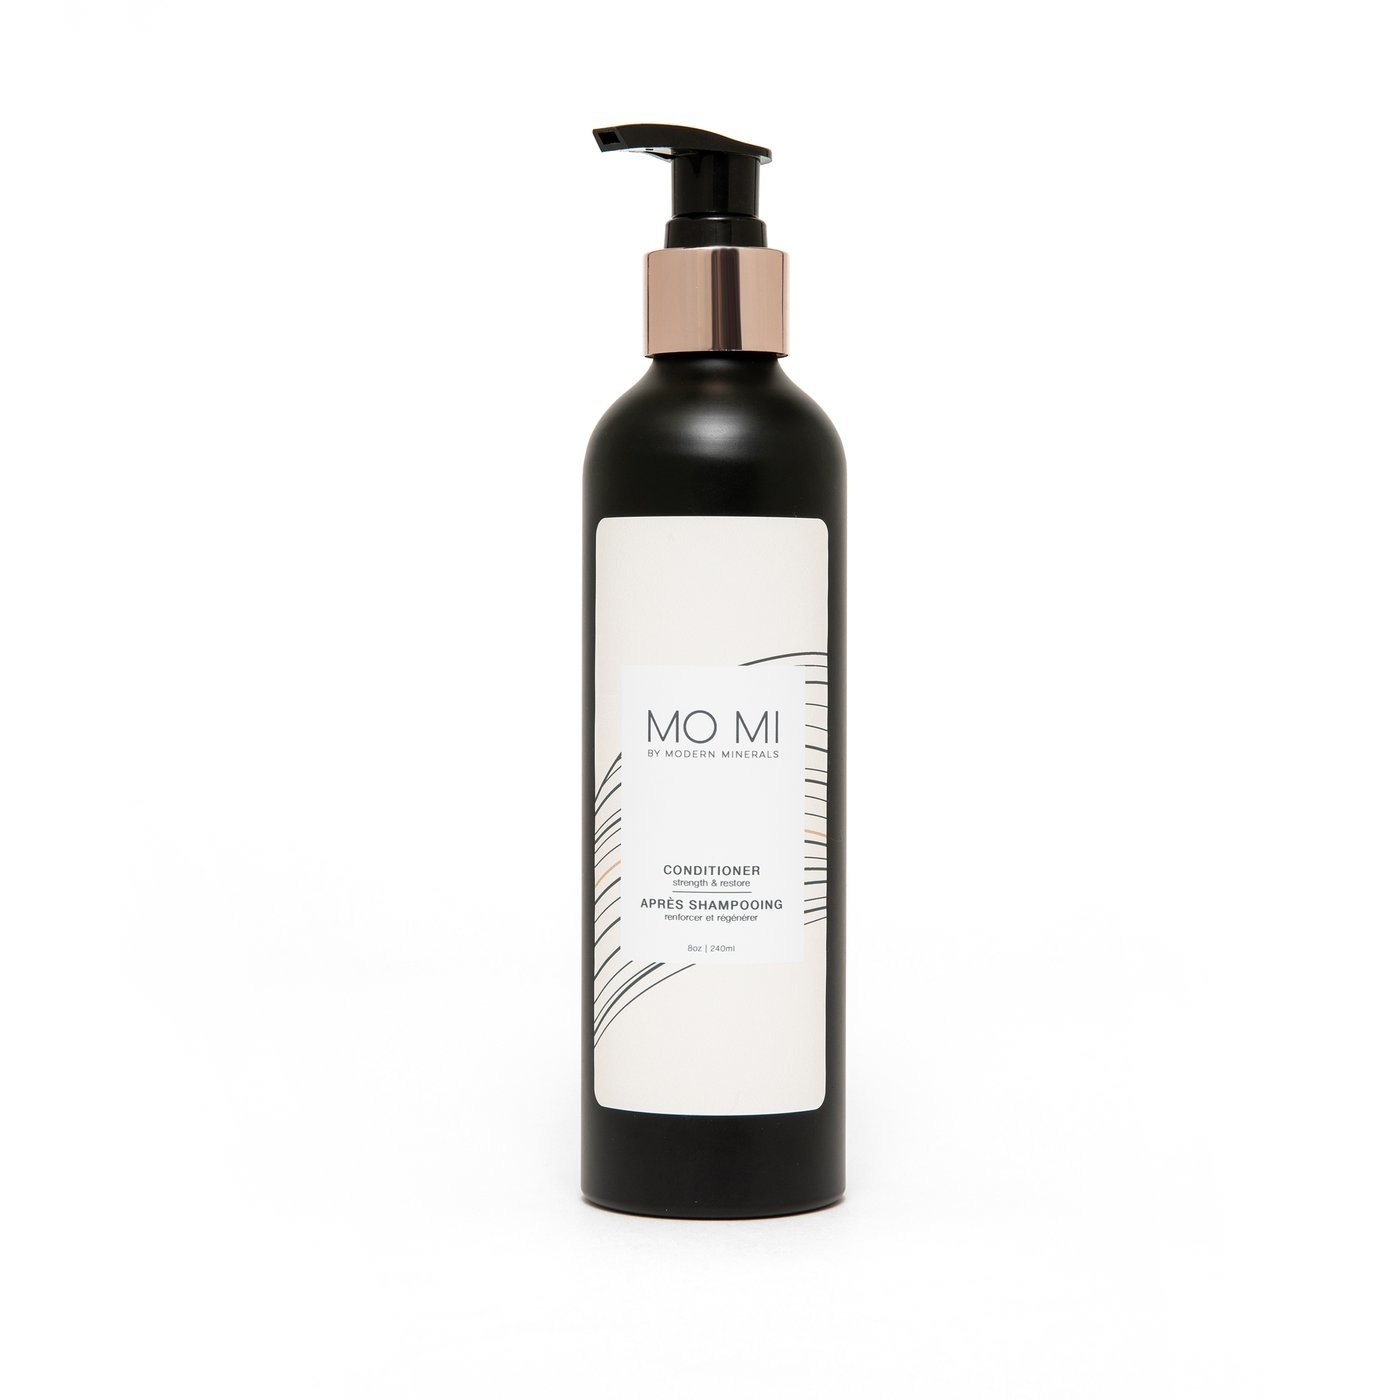 product image of the conditioner in a black bottle with pump